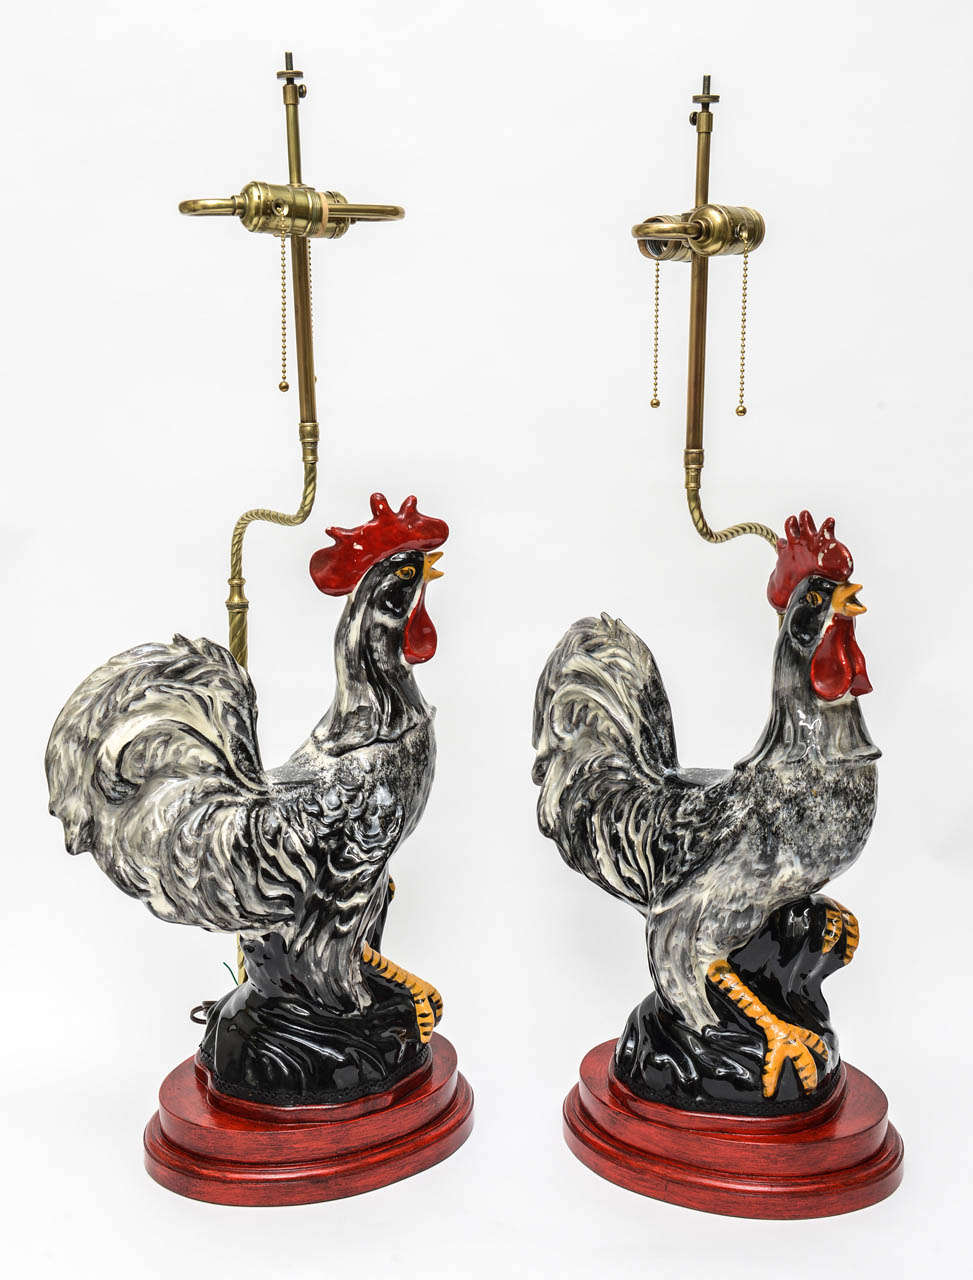 Fabulous pair of large scale Majolica rooster lamps on antiqued red bases.